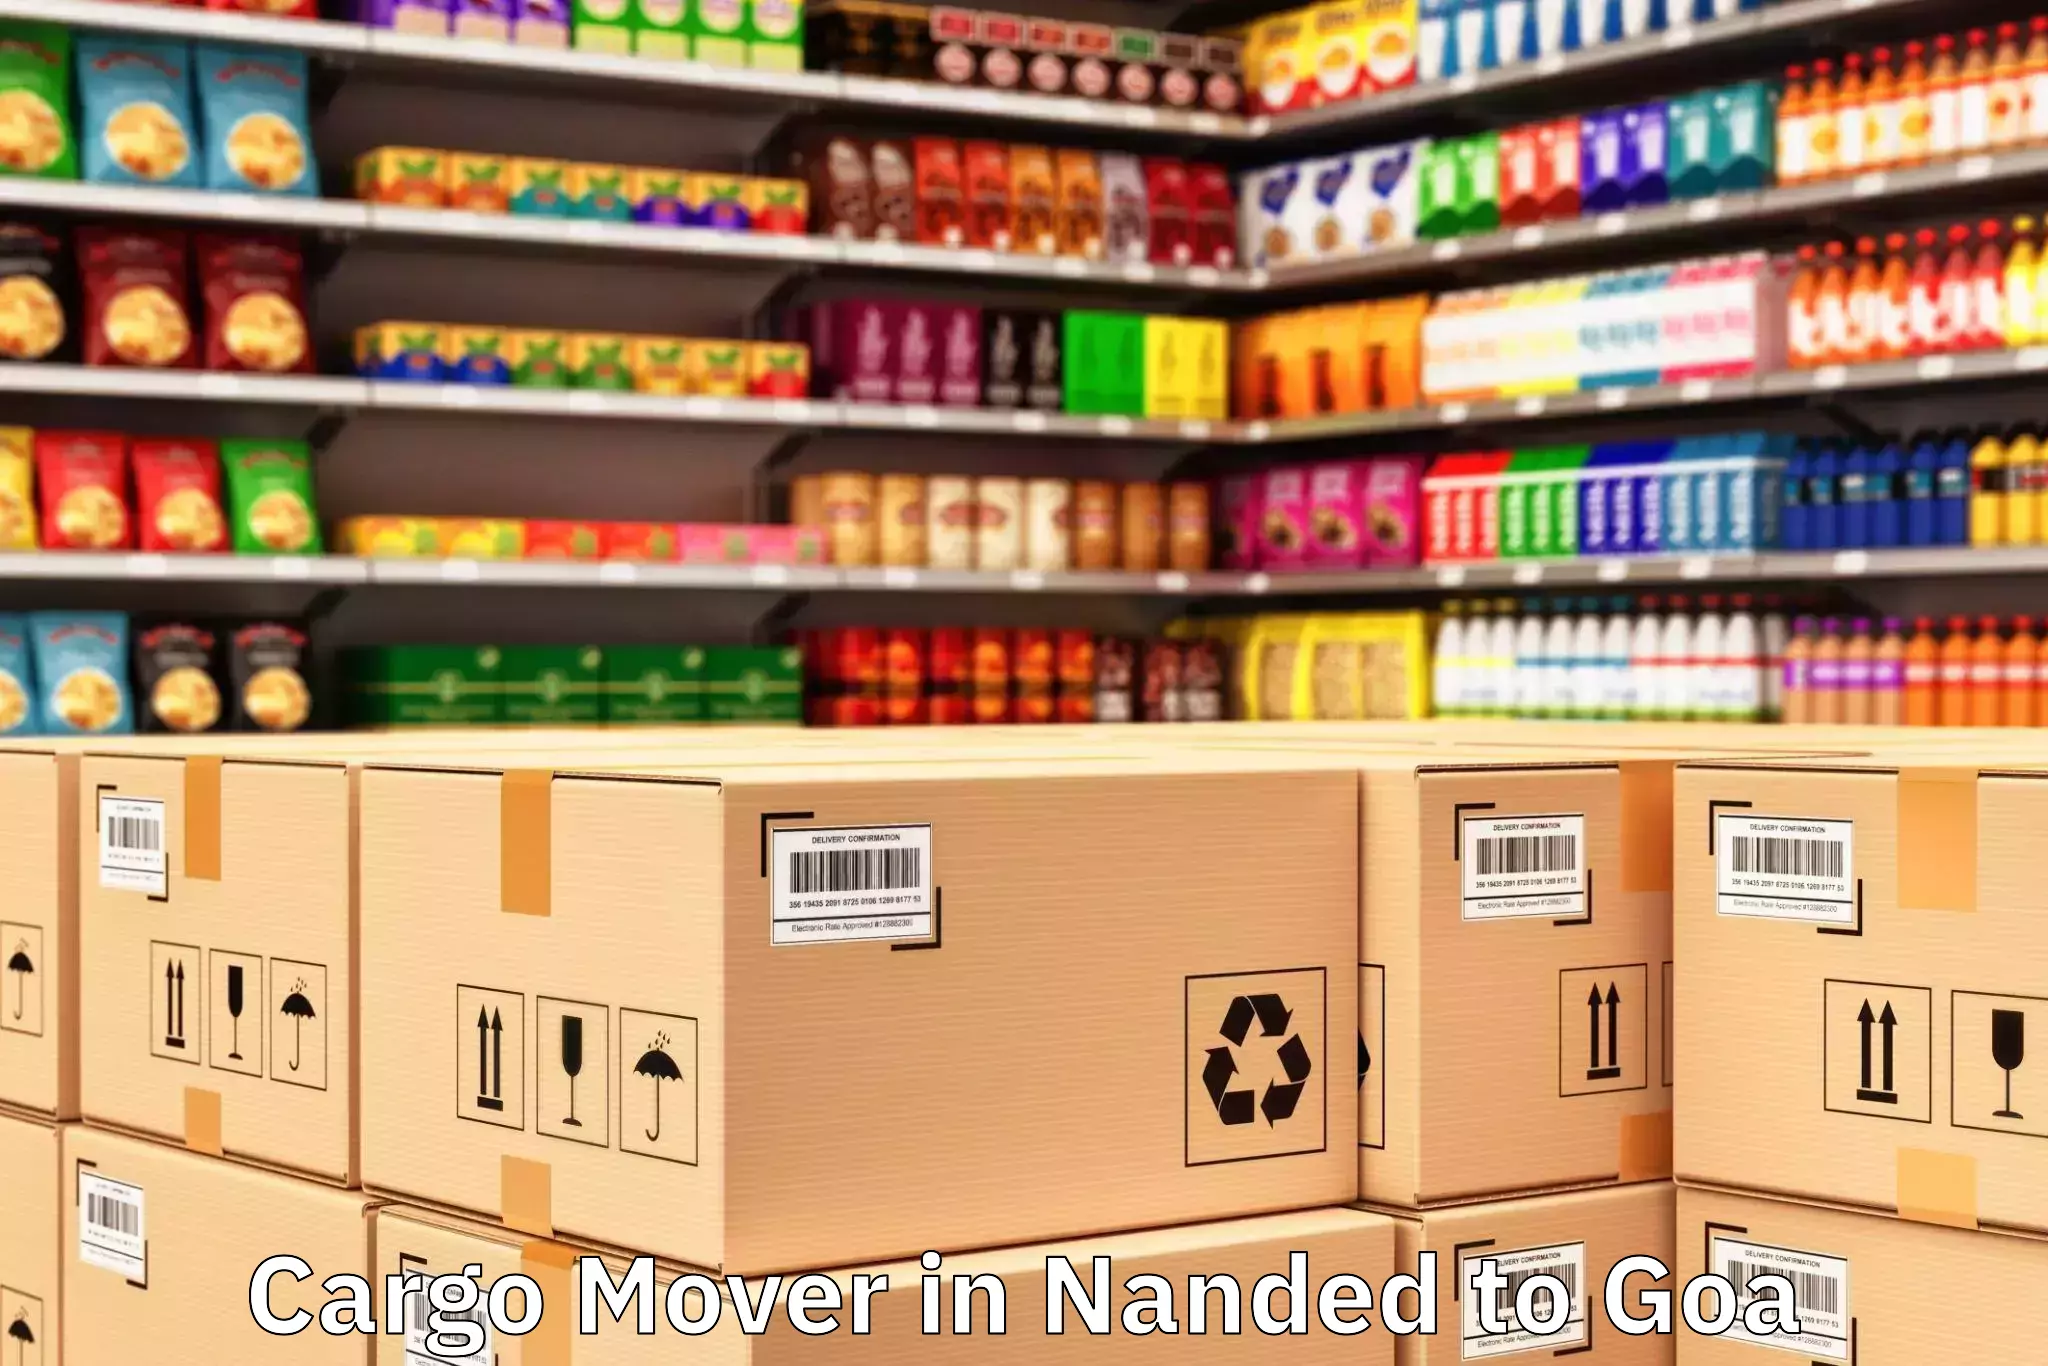 Professional Nanded to Goa Cargo Mover